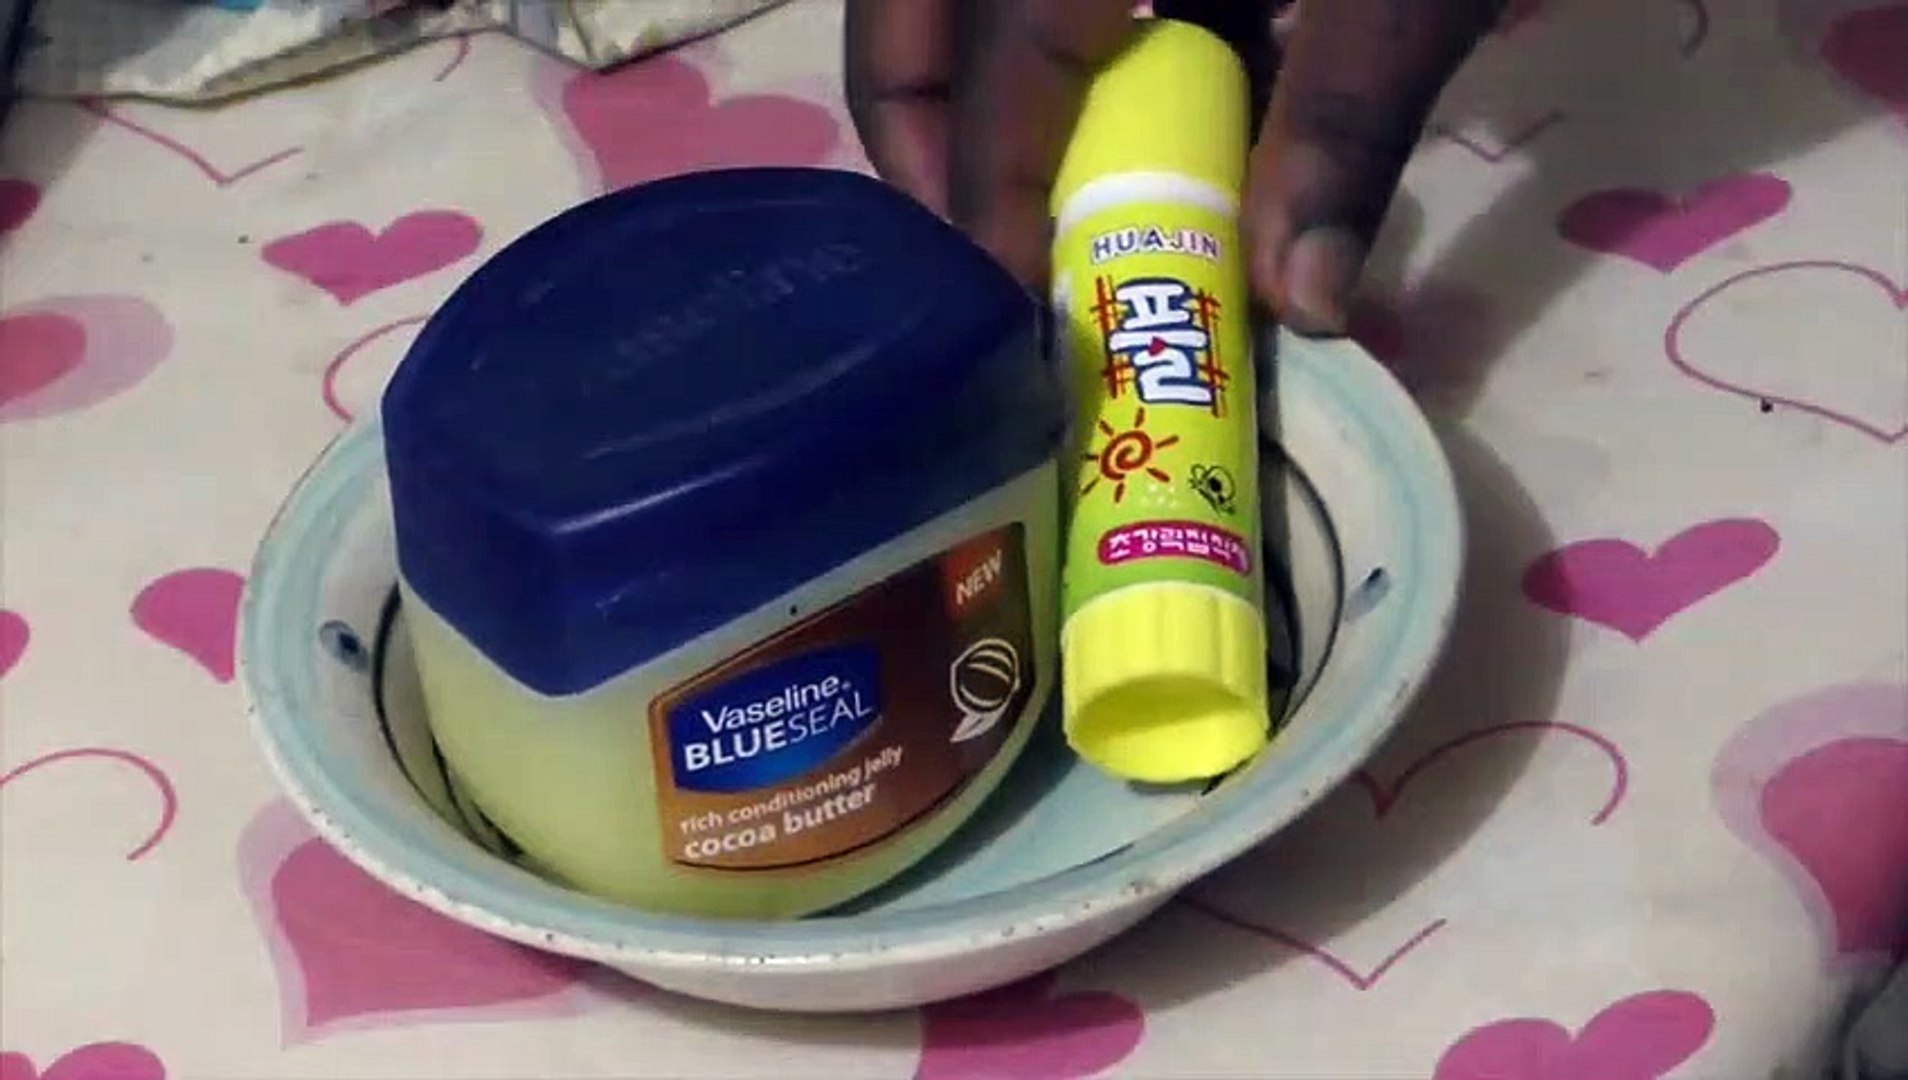 How To Make Slime With Vaseline And Glue Stick Slime With Vaseline And Glue Stick Only